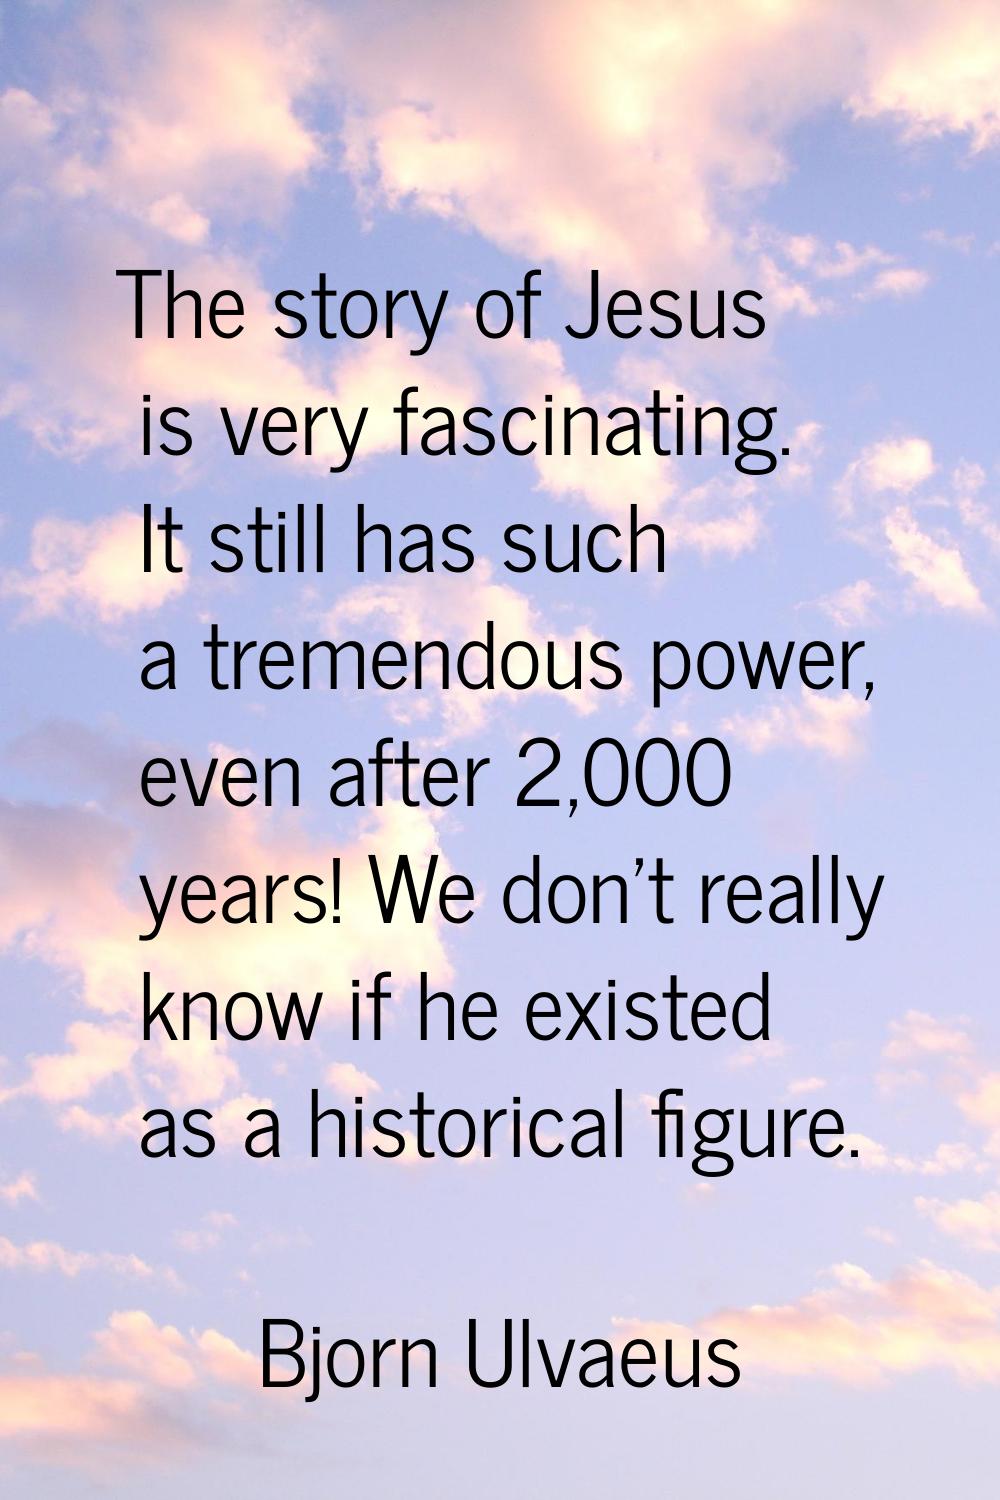 The story of Jesus is very fascinating. It still has such a tremendous power, even after 2,000 year